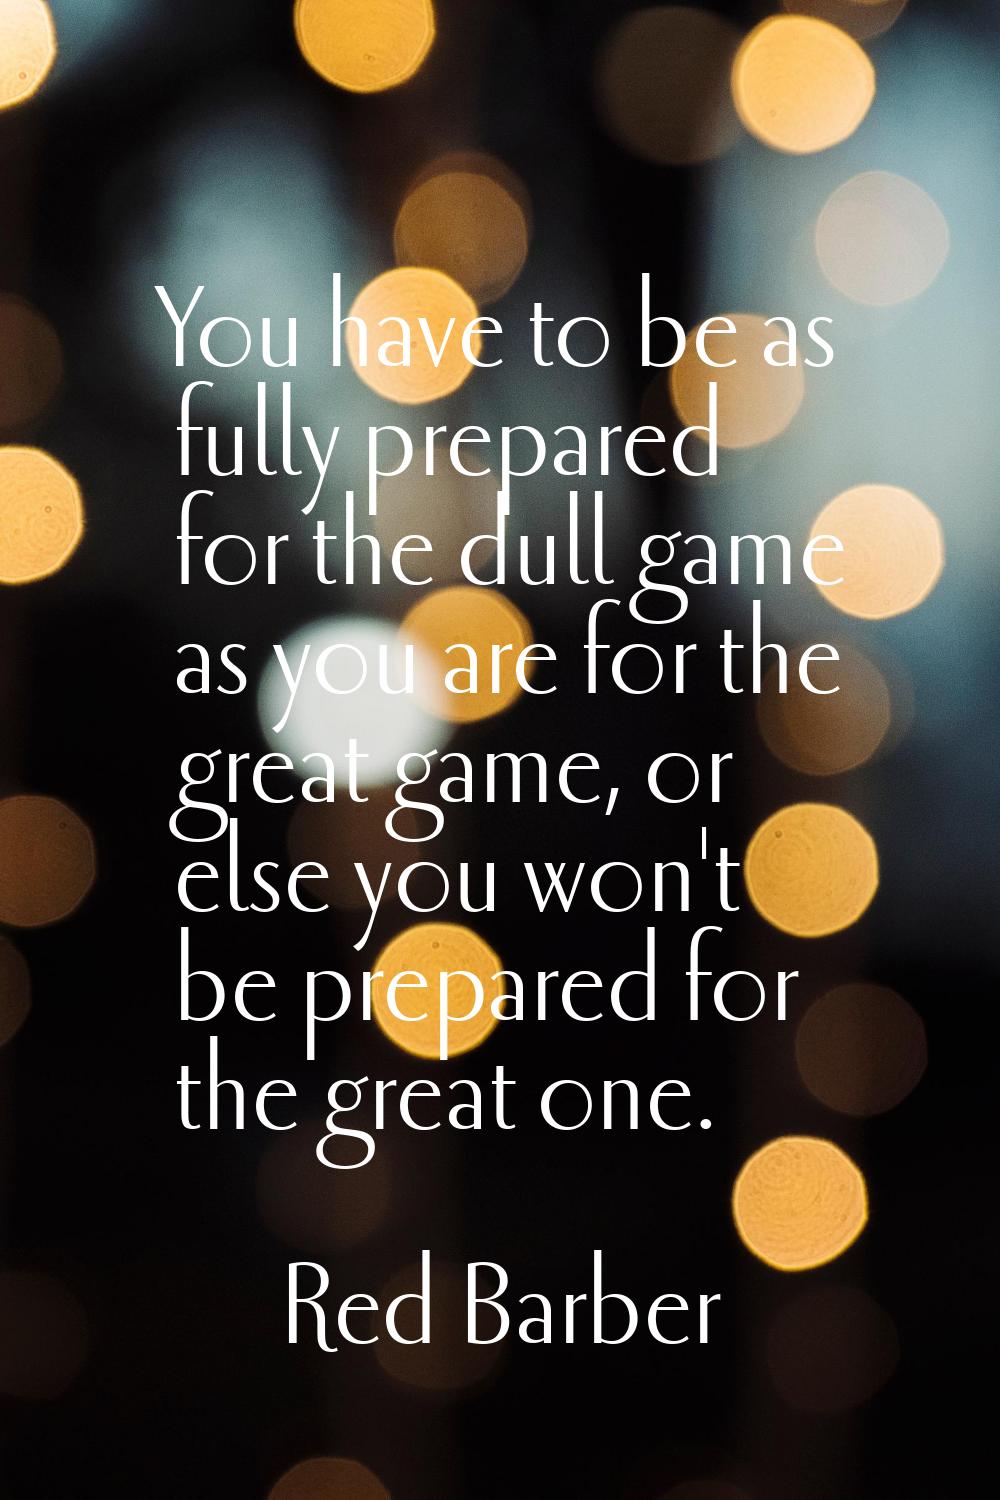 You have to be as fully prepared for the dull game as you are for the great game, or else you won't